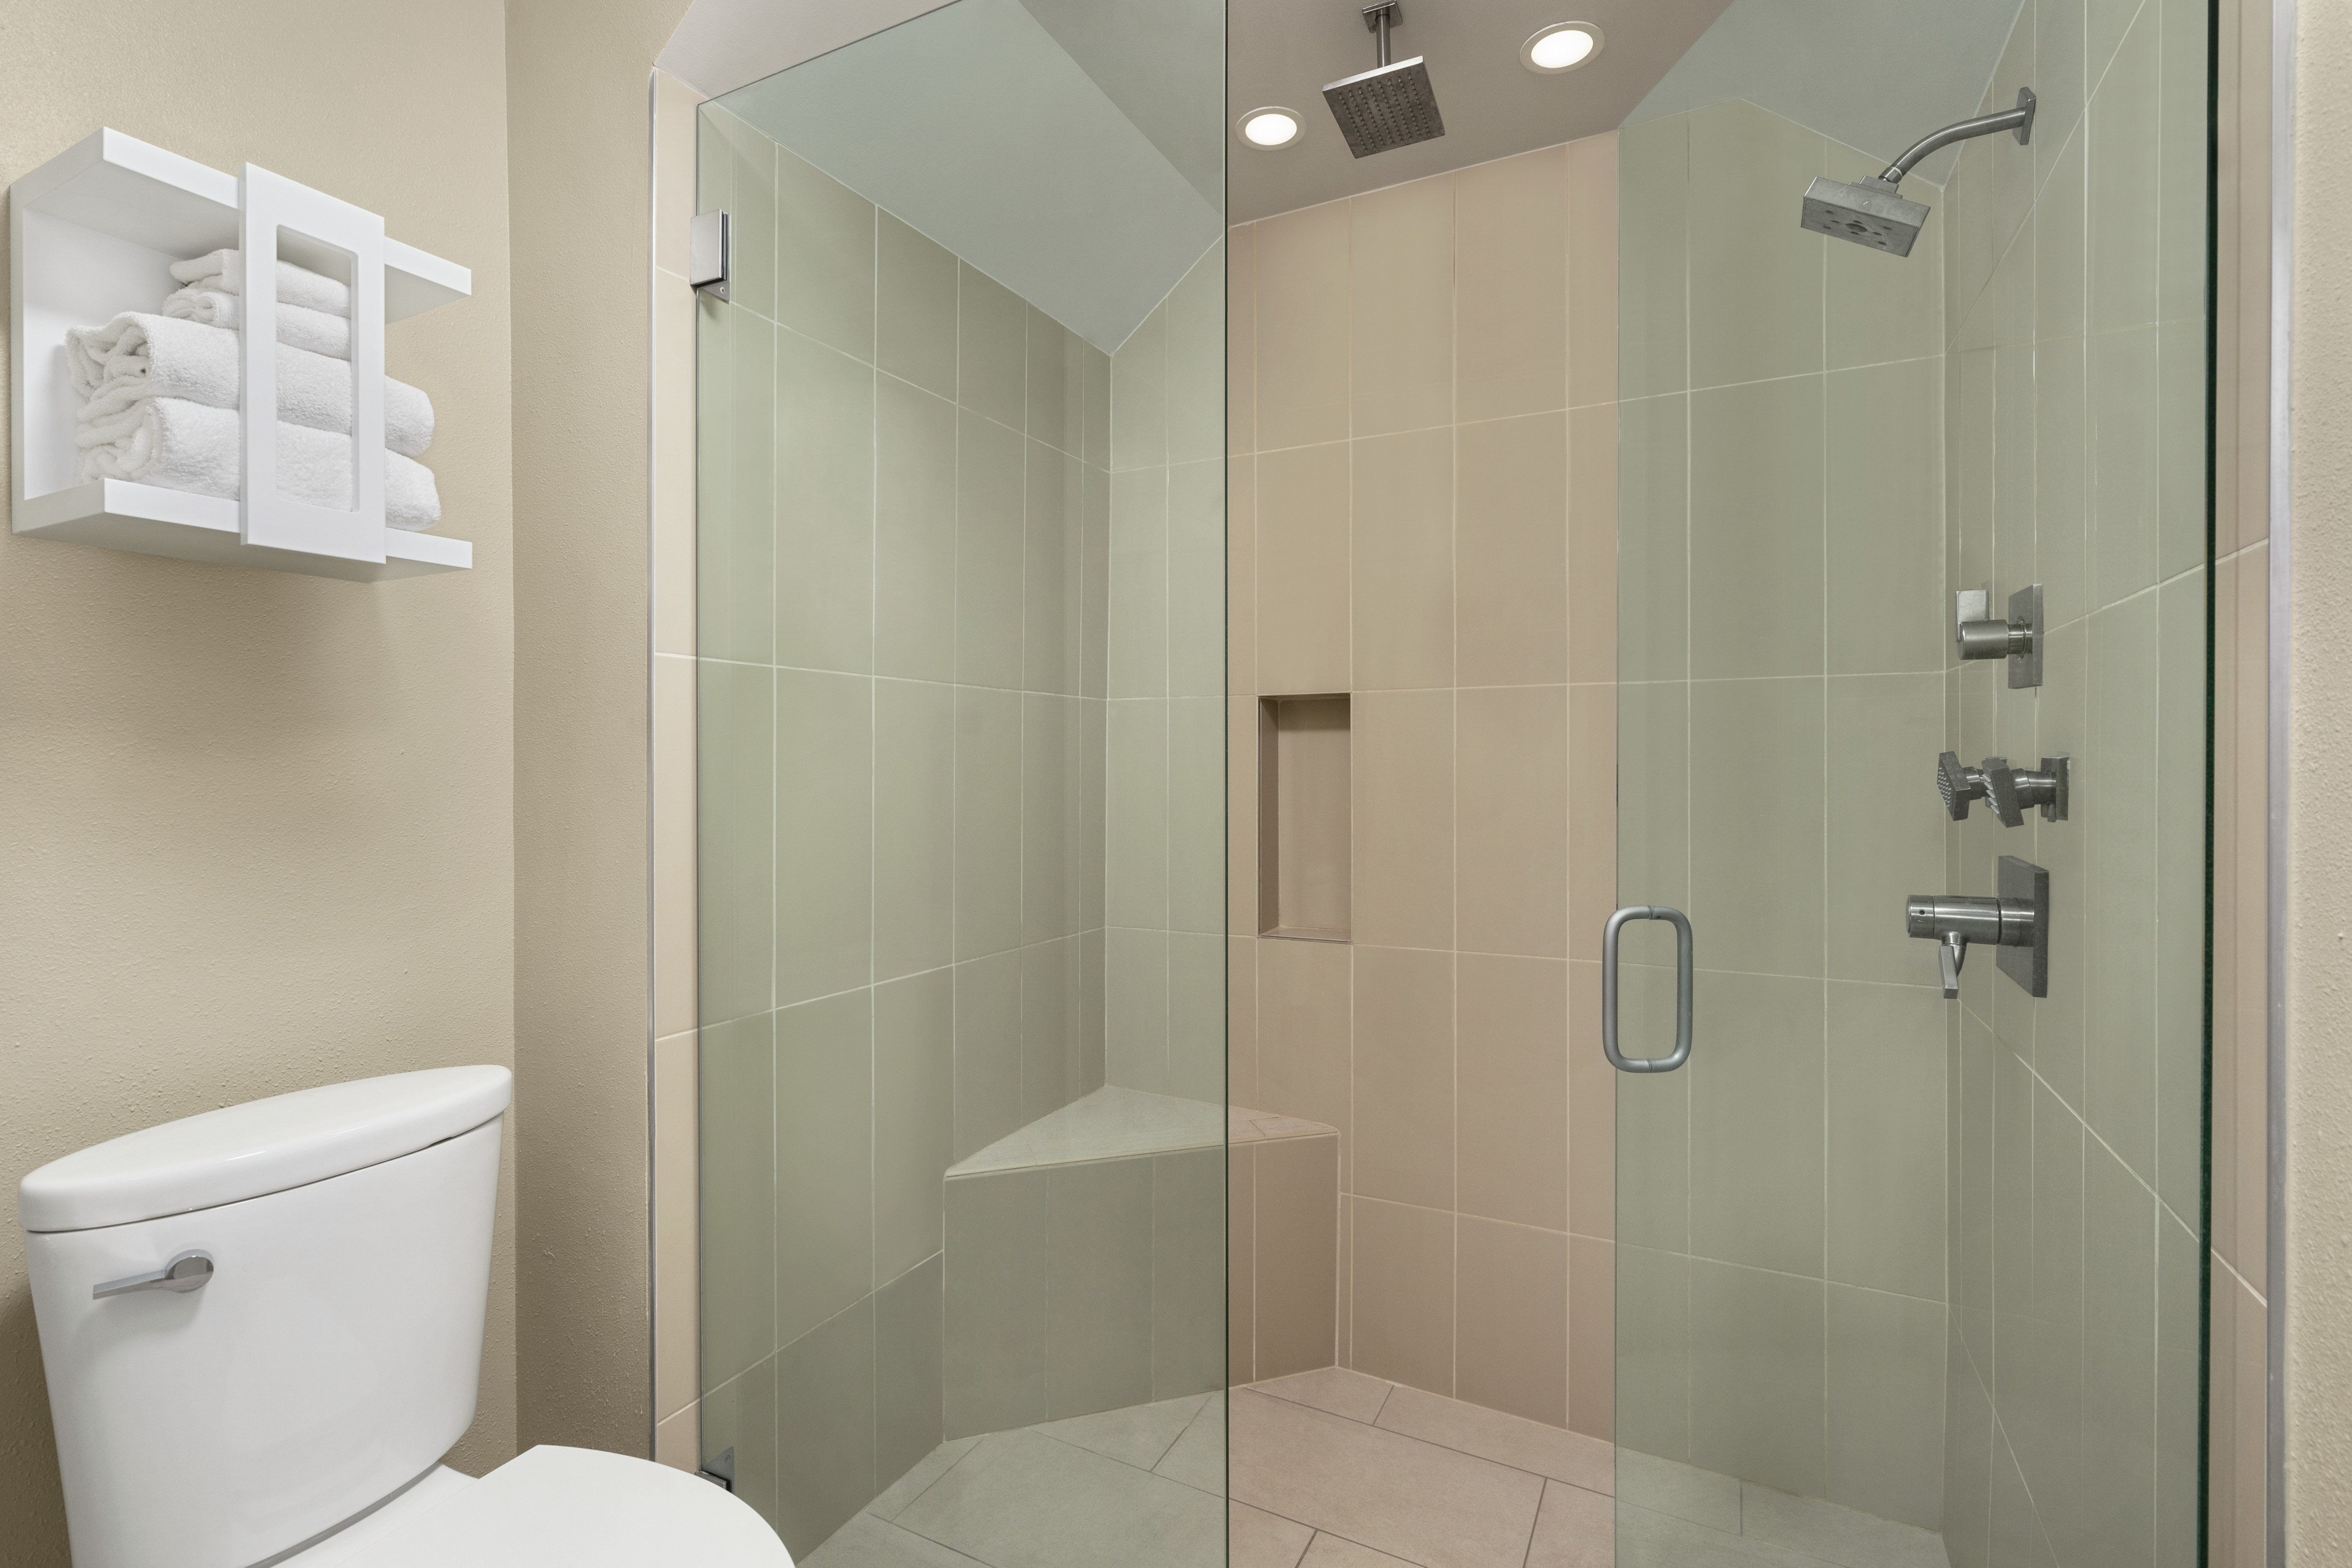 Spacious stand up shower with glass doors, dual shower head, and seating.